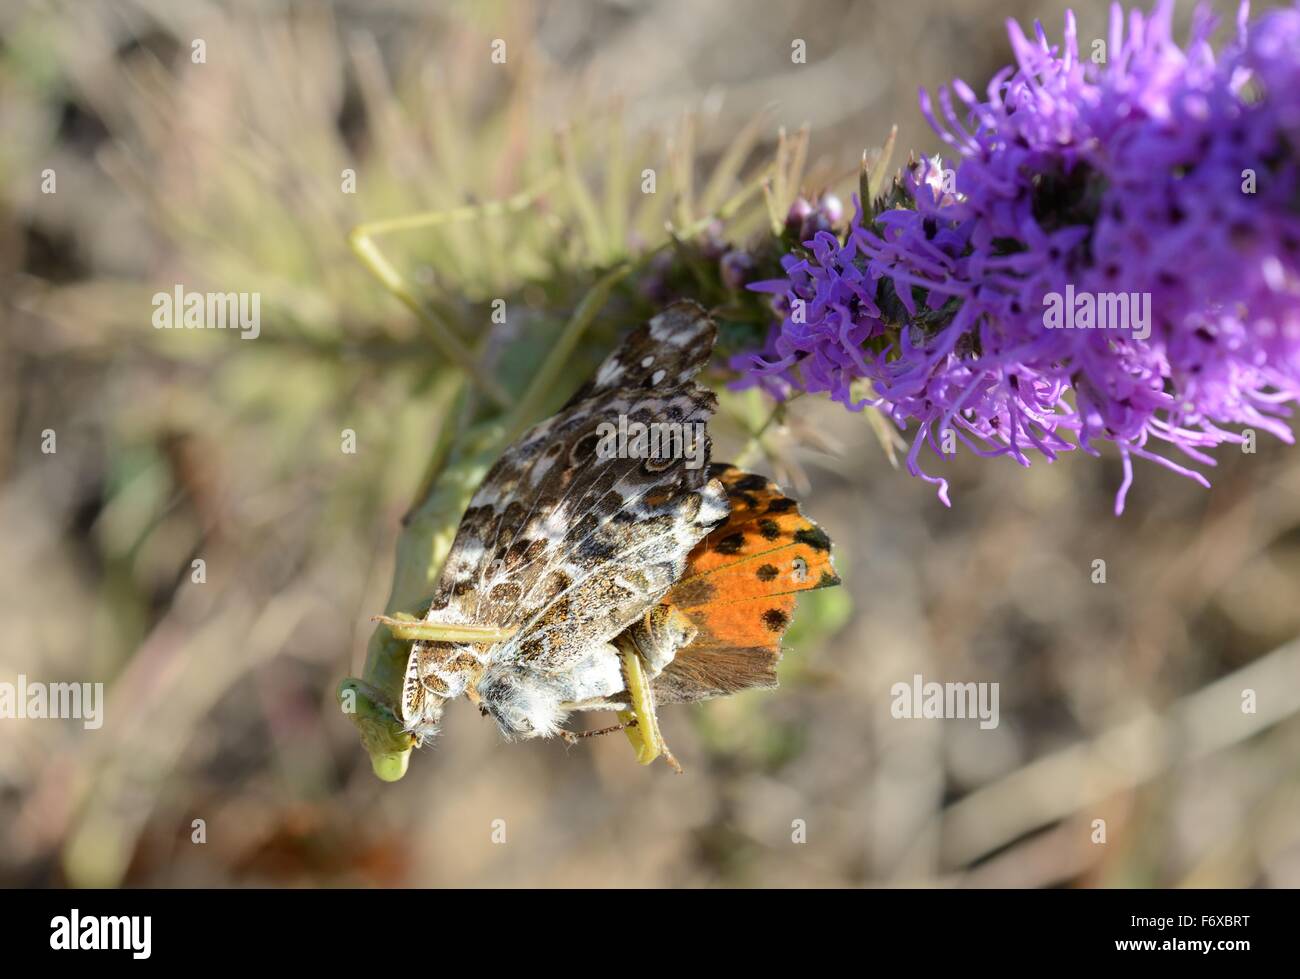 Praying mantis eating a butterfly Stock Photo